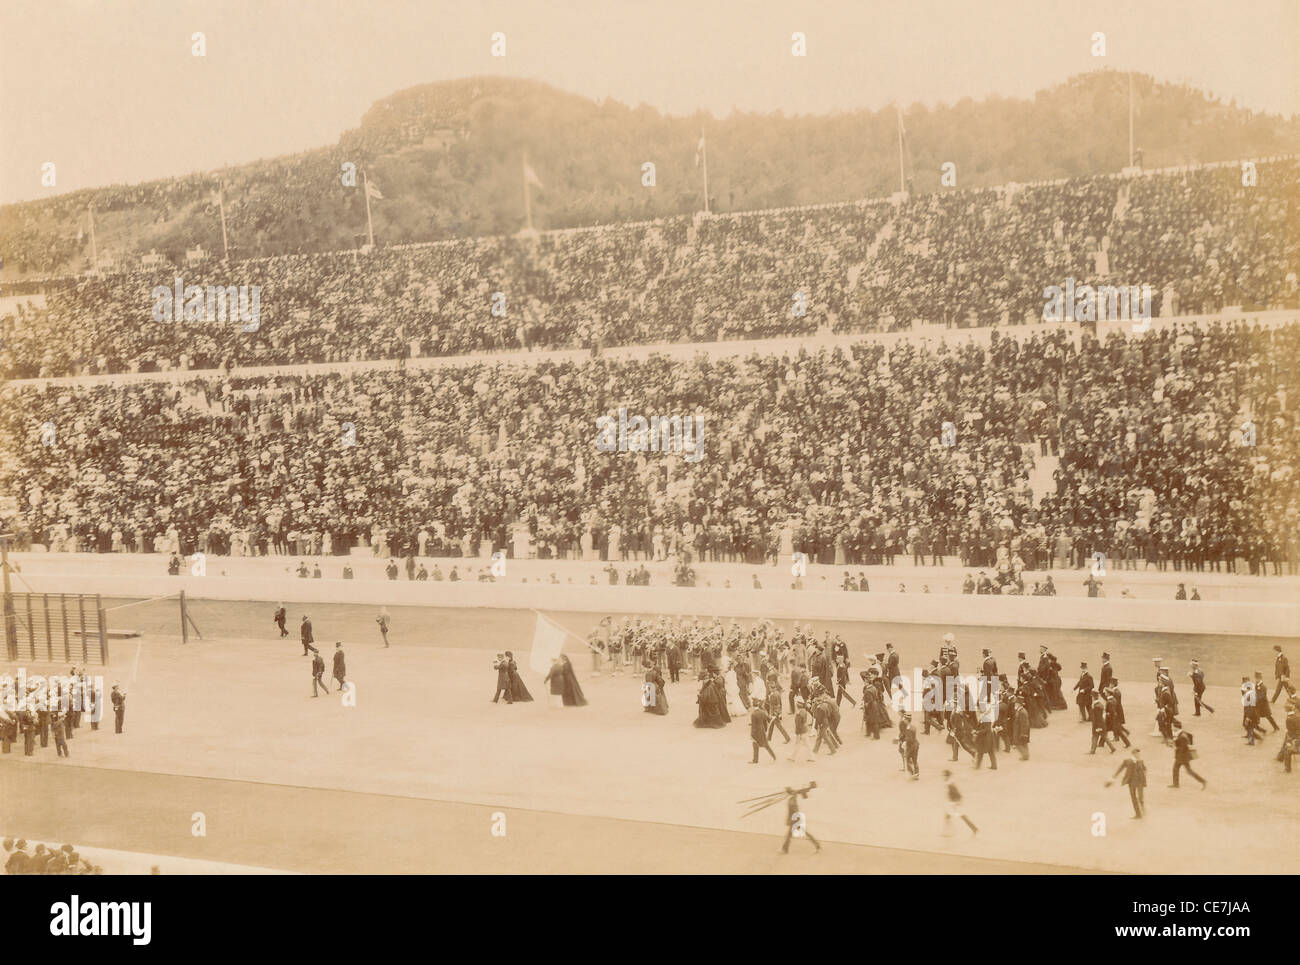 Greece, Attica, Athens, Opening ceremony of the 1896 Games of the I Olympiad in the Panathinaiko stadium, royal party arrival. Stock Photo